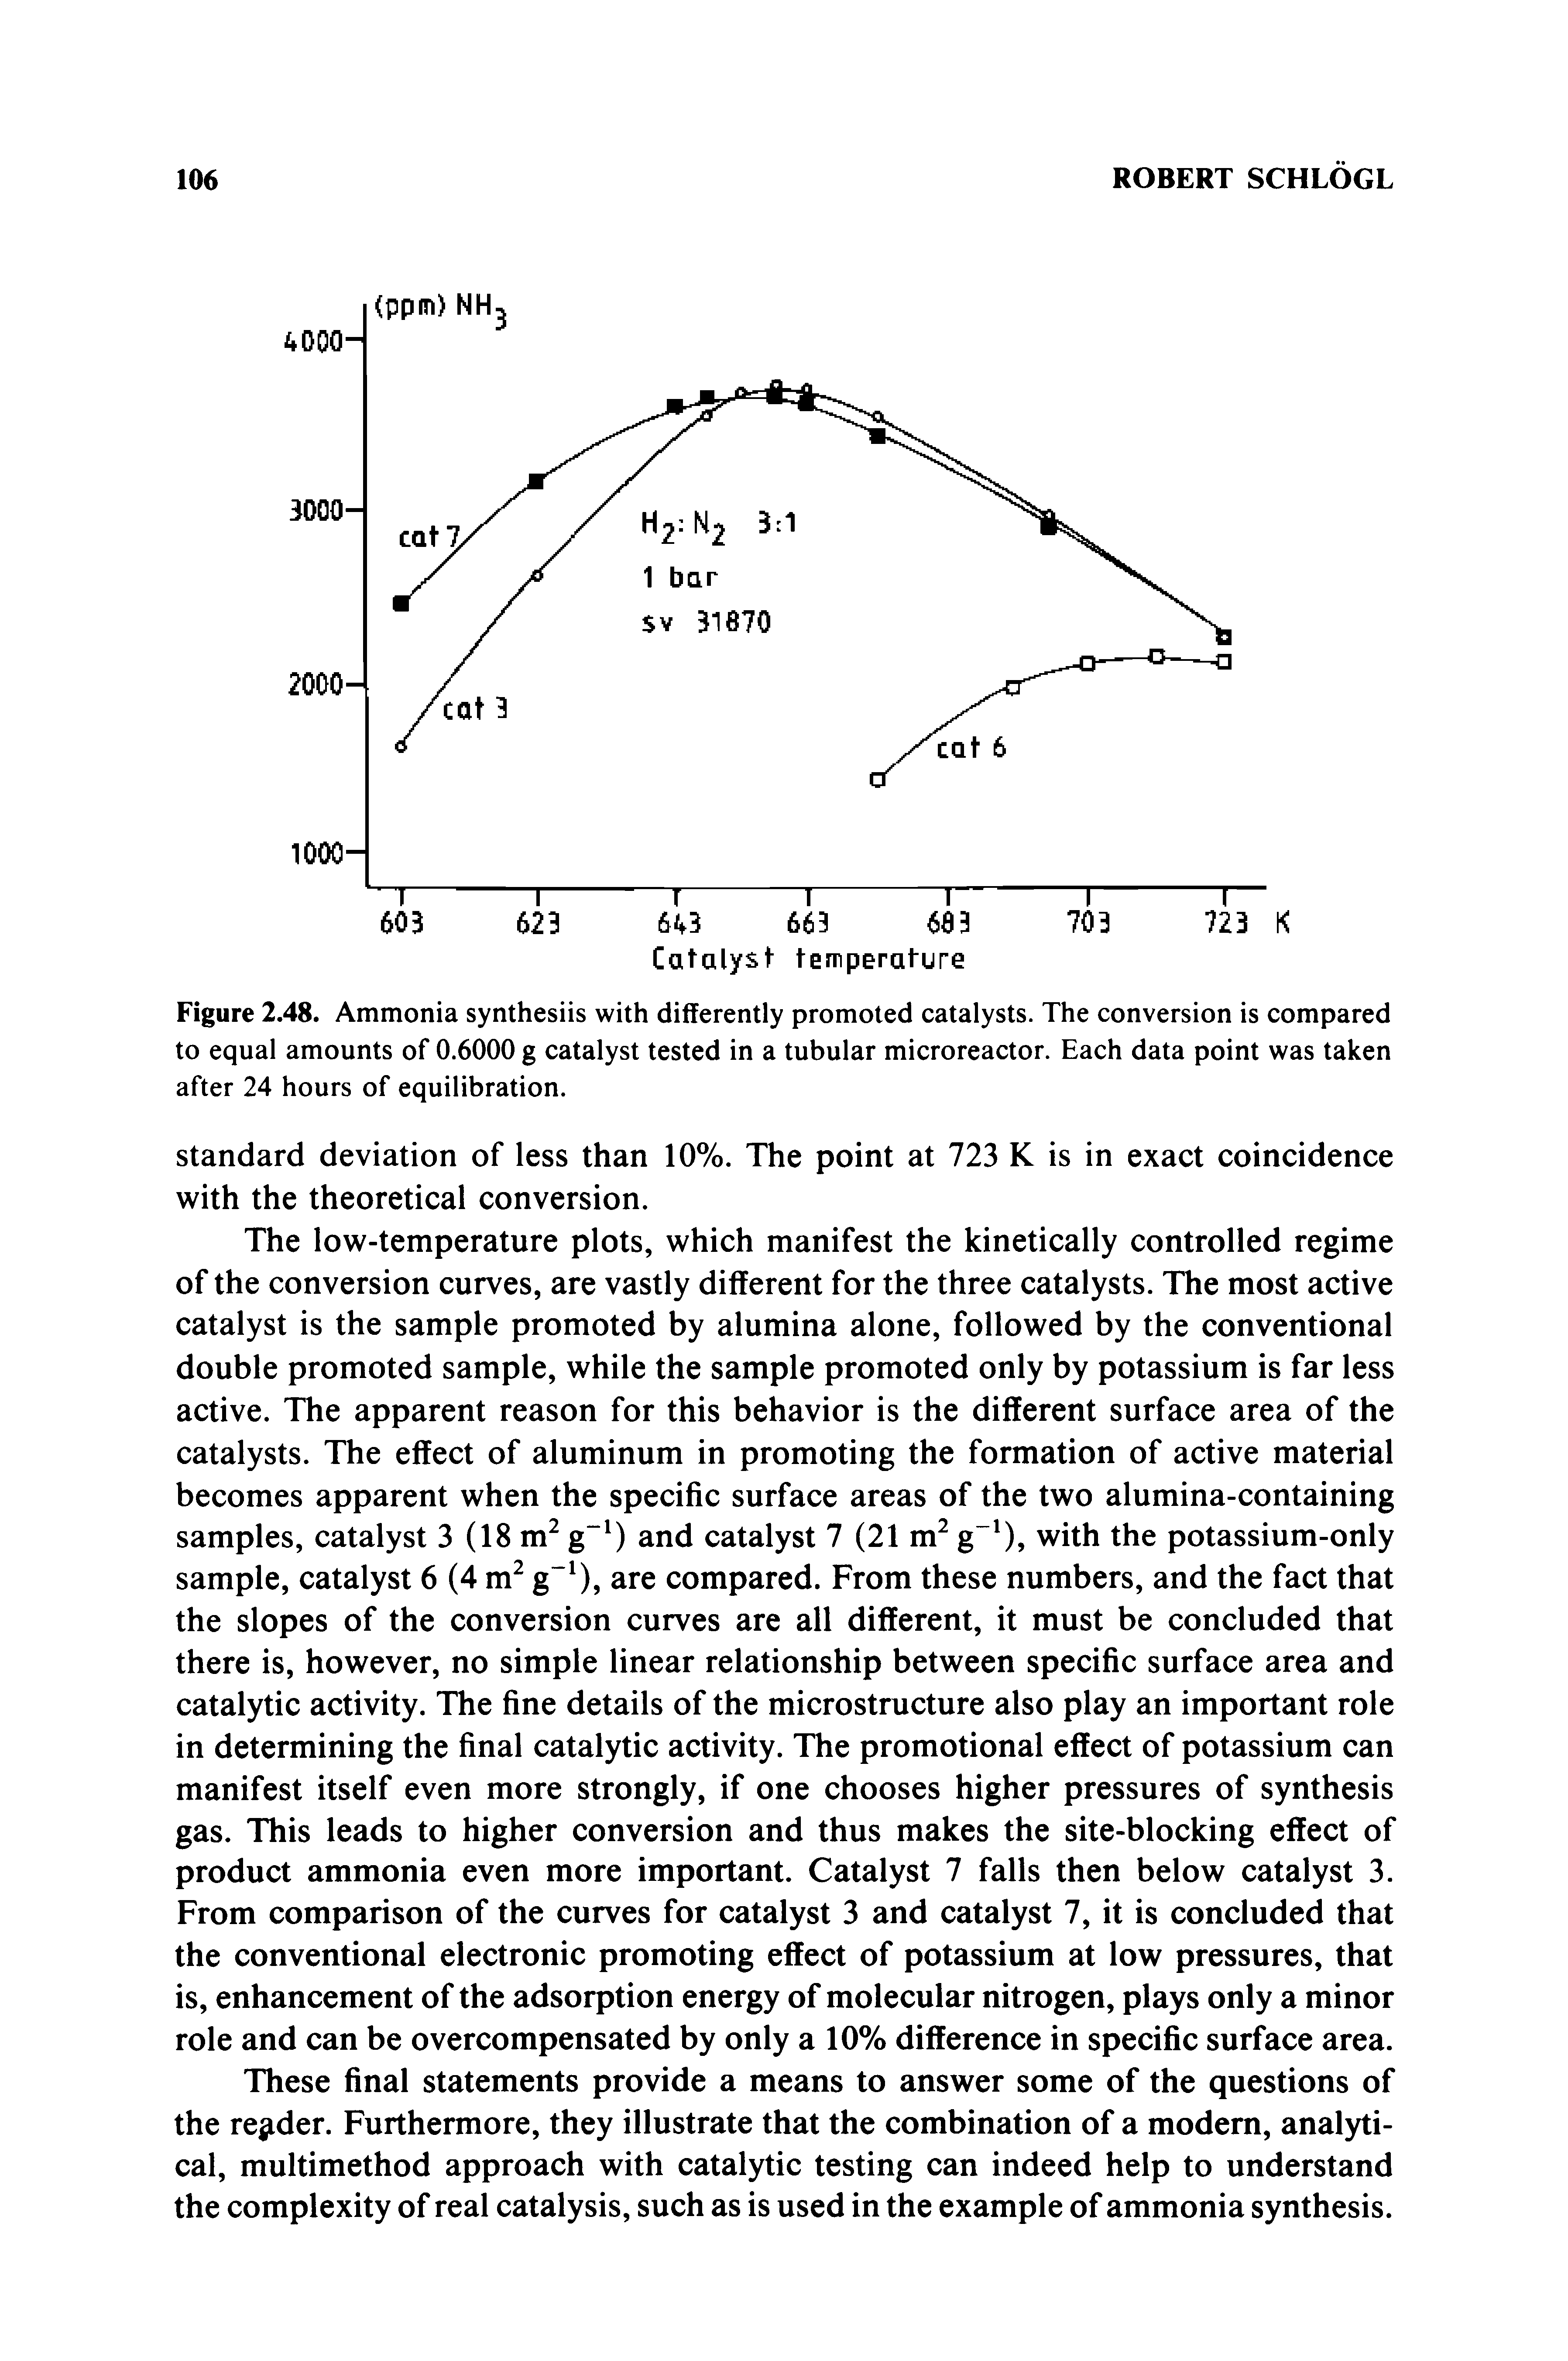 Figure 2.48. Ammonia synthesiis with differently promoted catalysts. The conversion is compared to equal amounts of 0.6000 g catalyst tested in a tubular microreactor. Each data point was taken after 24 hours of equilibration.